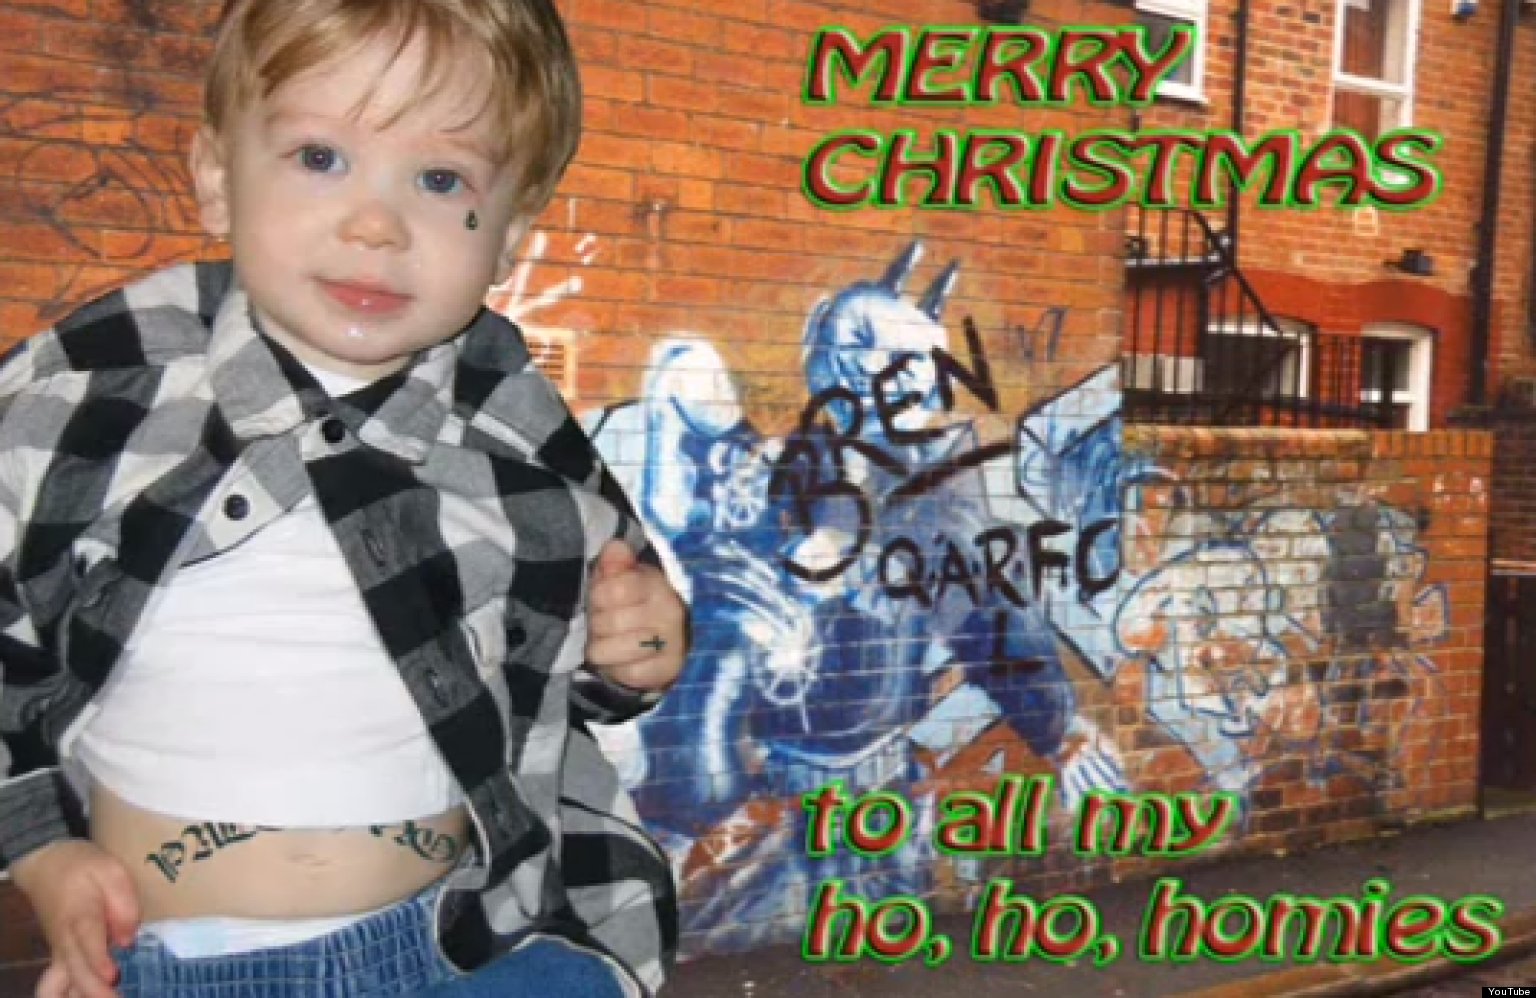 Funny Christmas Cards Feature Father's Kids Photoshopped Into Odd